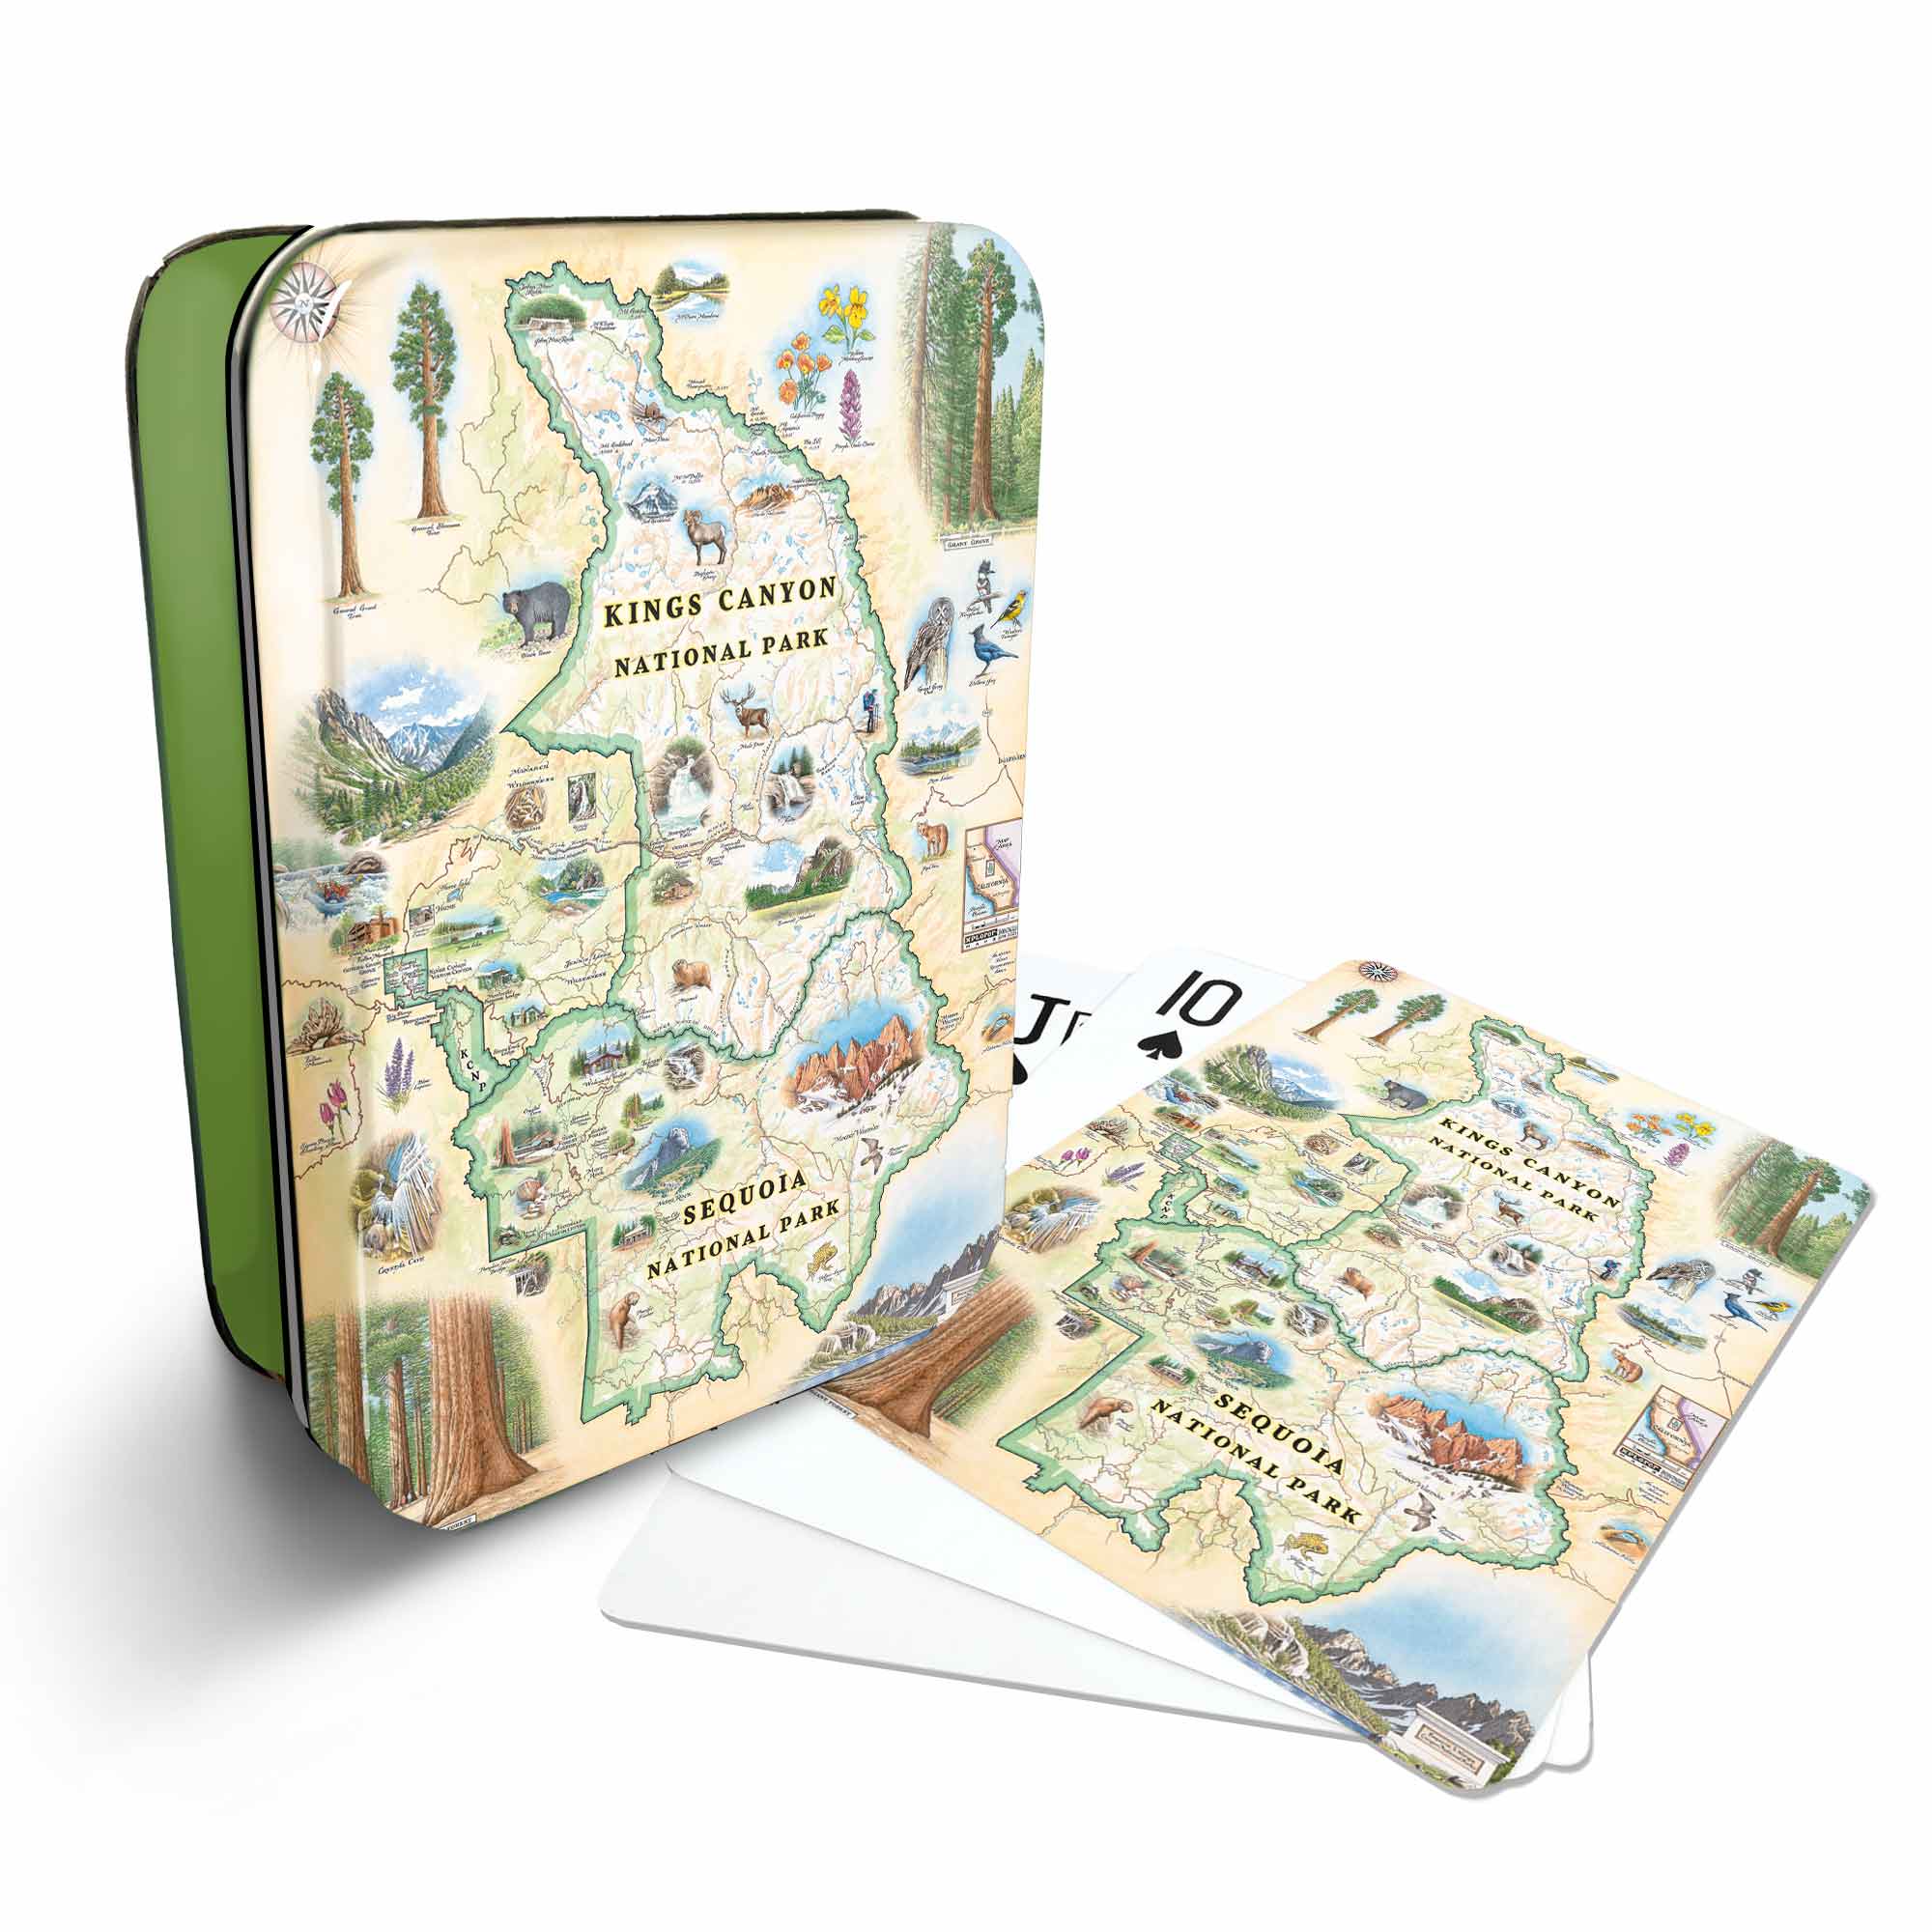 Sequoia and Kings canyon Nation Parks Map Playing cards that features iconic attractions, flora and fauna of that area - Green Metal Tin